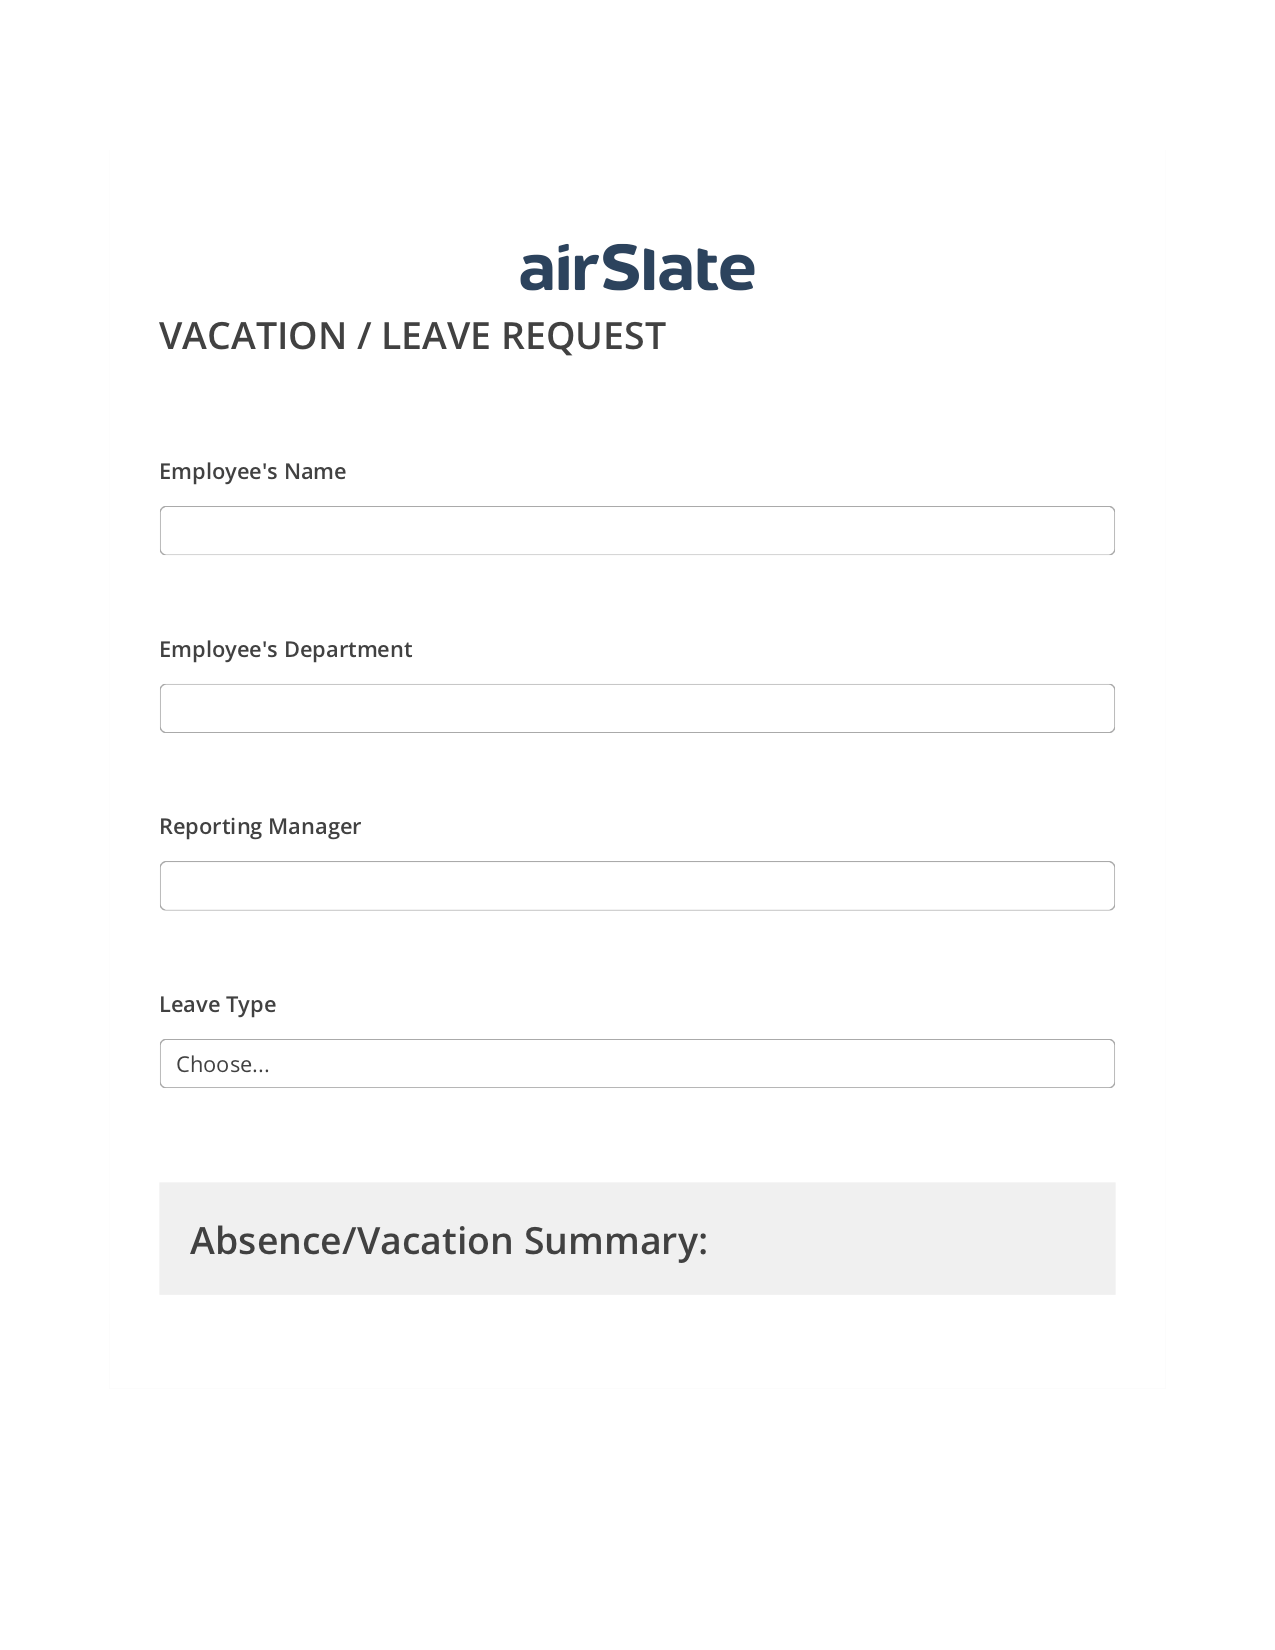 Vacation/Leave Request Workflow Pre-fill Dropdowns from CSV file Bot, Unassign Role Bot, Export to MySQL Bot